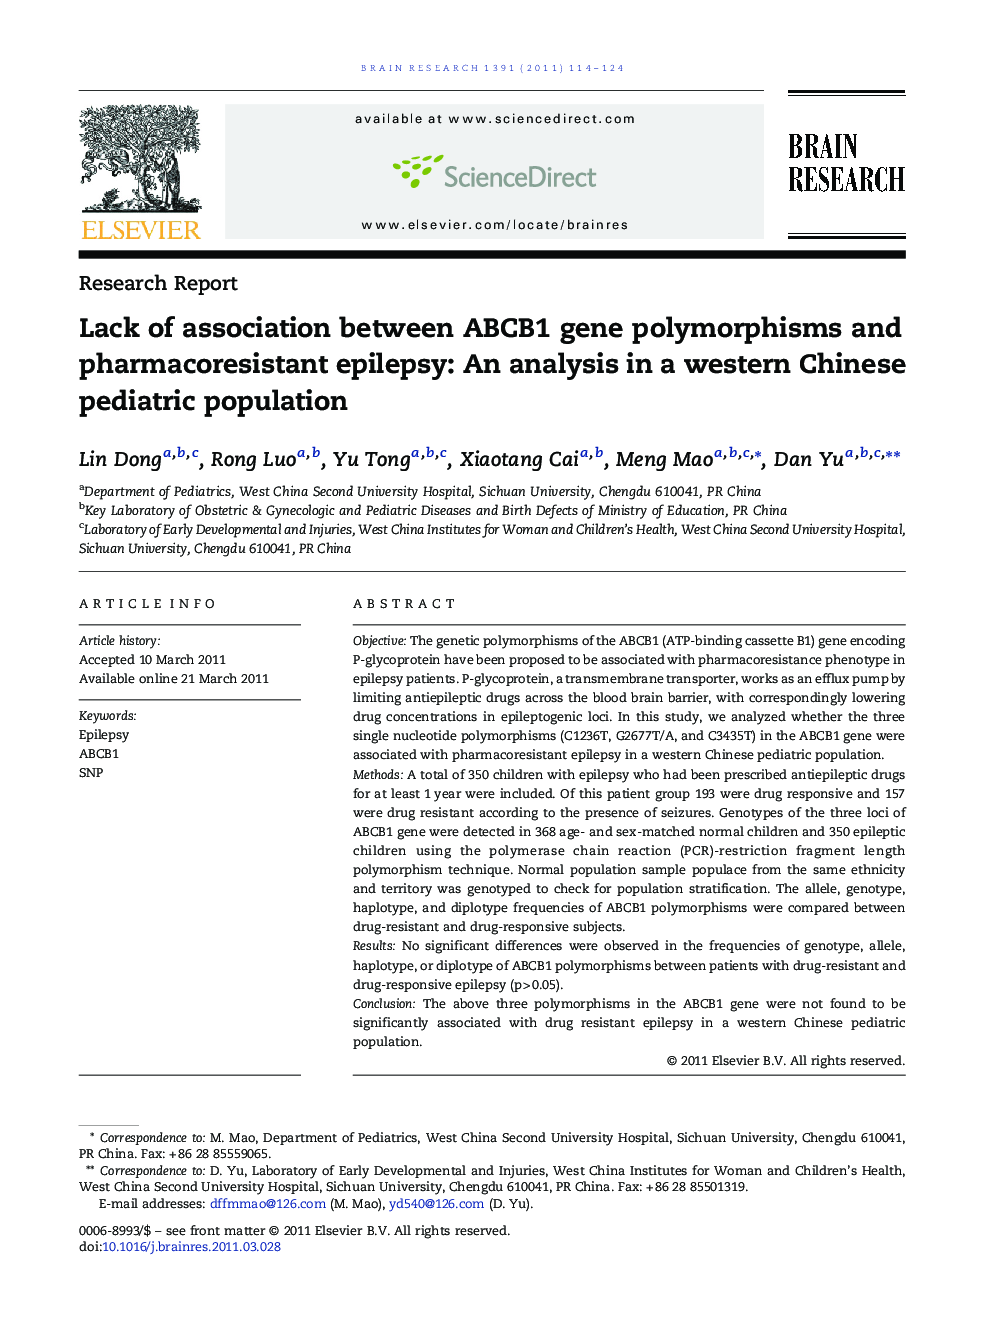 Lack of association between ABCB1 gene polymorphisms and pharmacoresistant epilepsy: An analysis in a western Chinese pediatric population